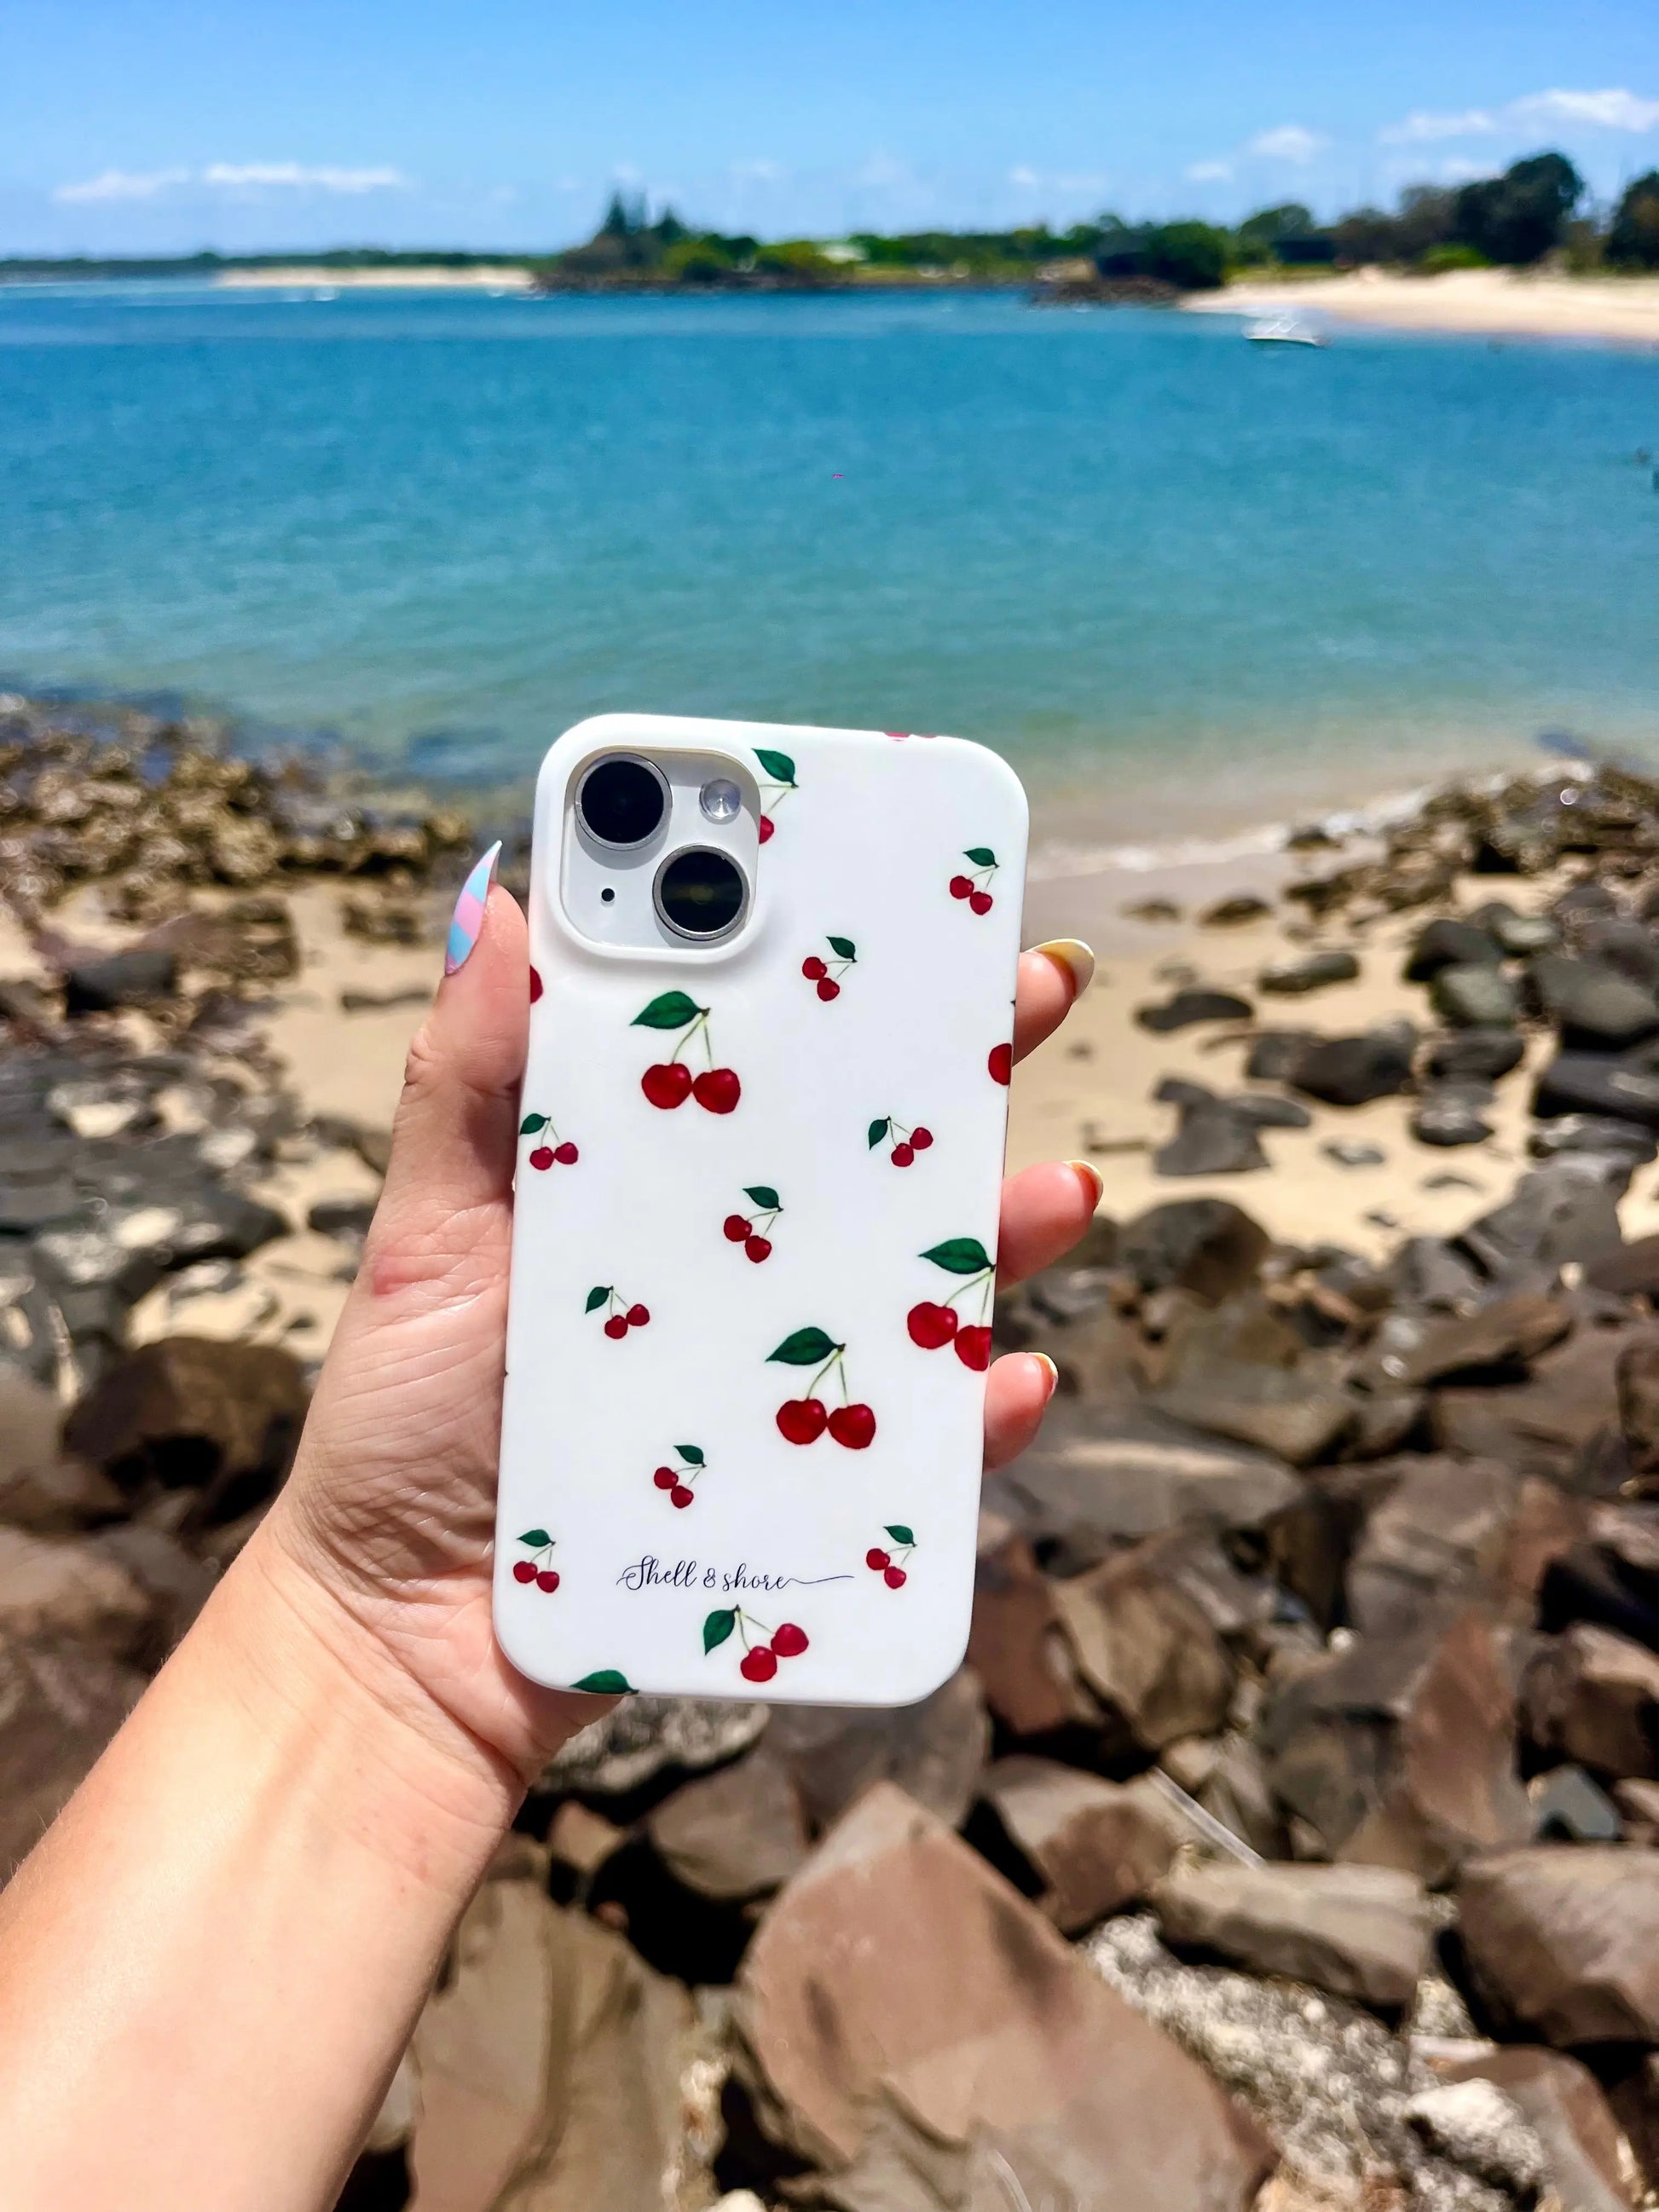 CherryPop iPhone Case Shell And Shore